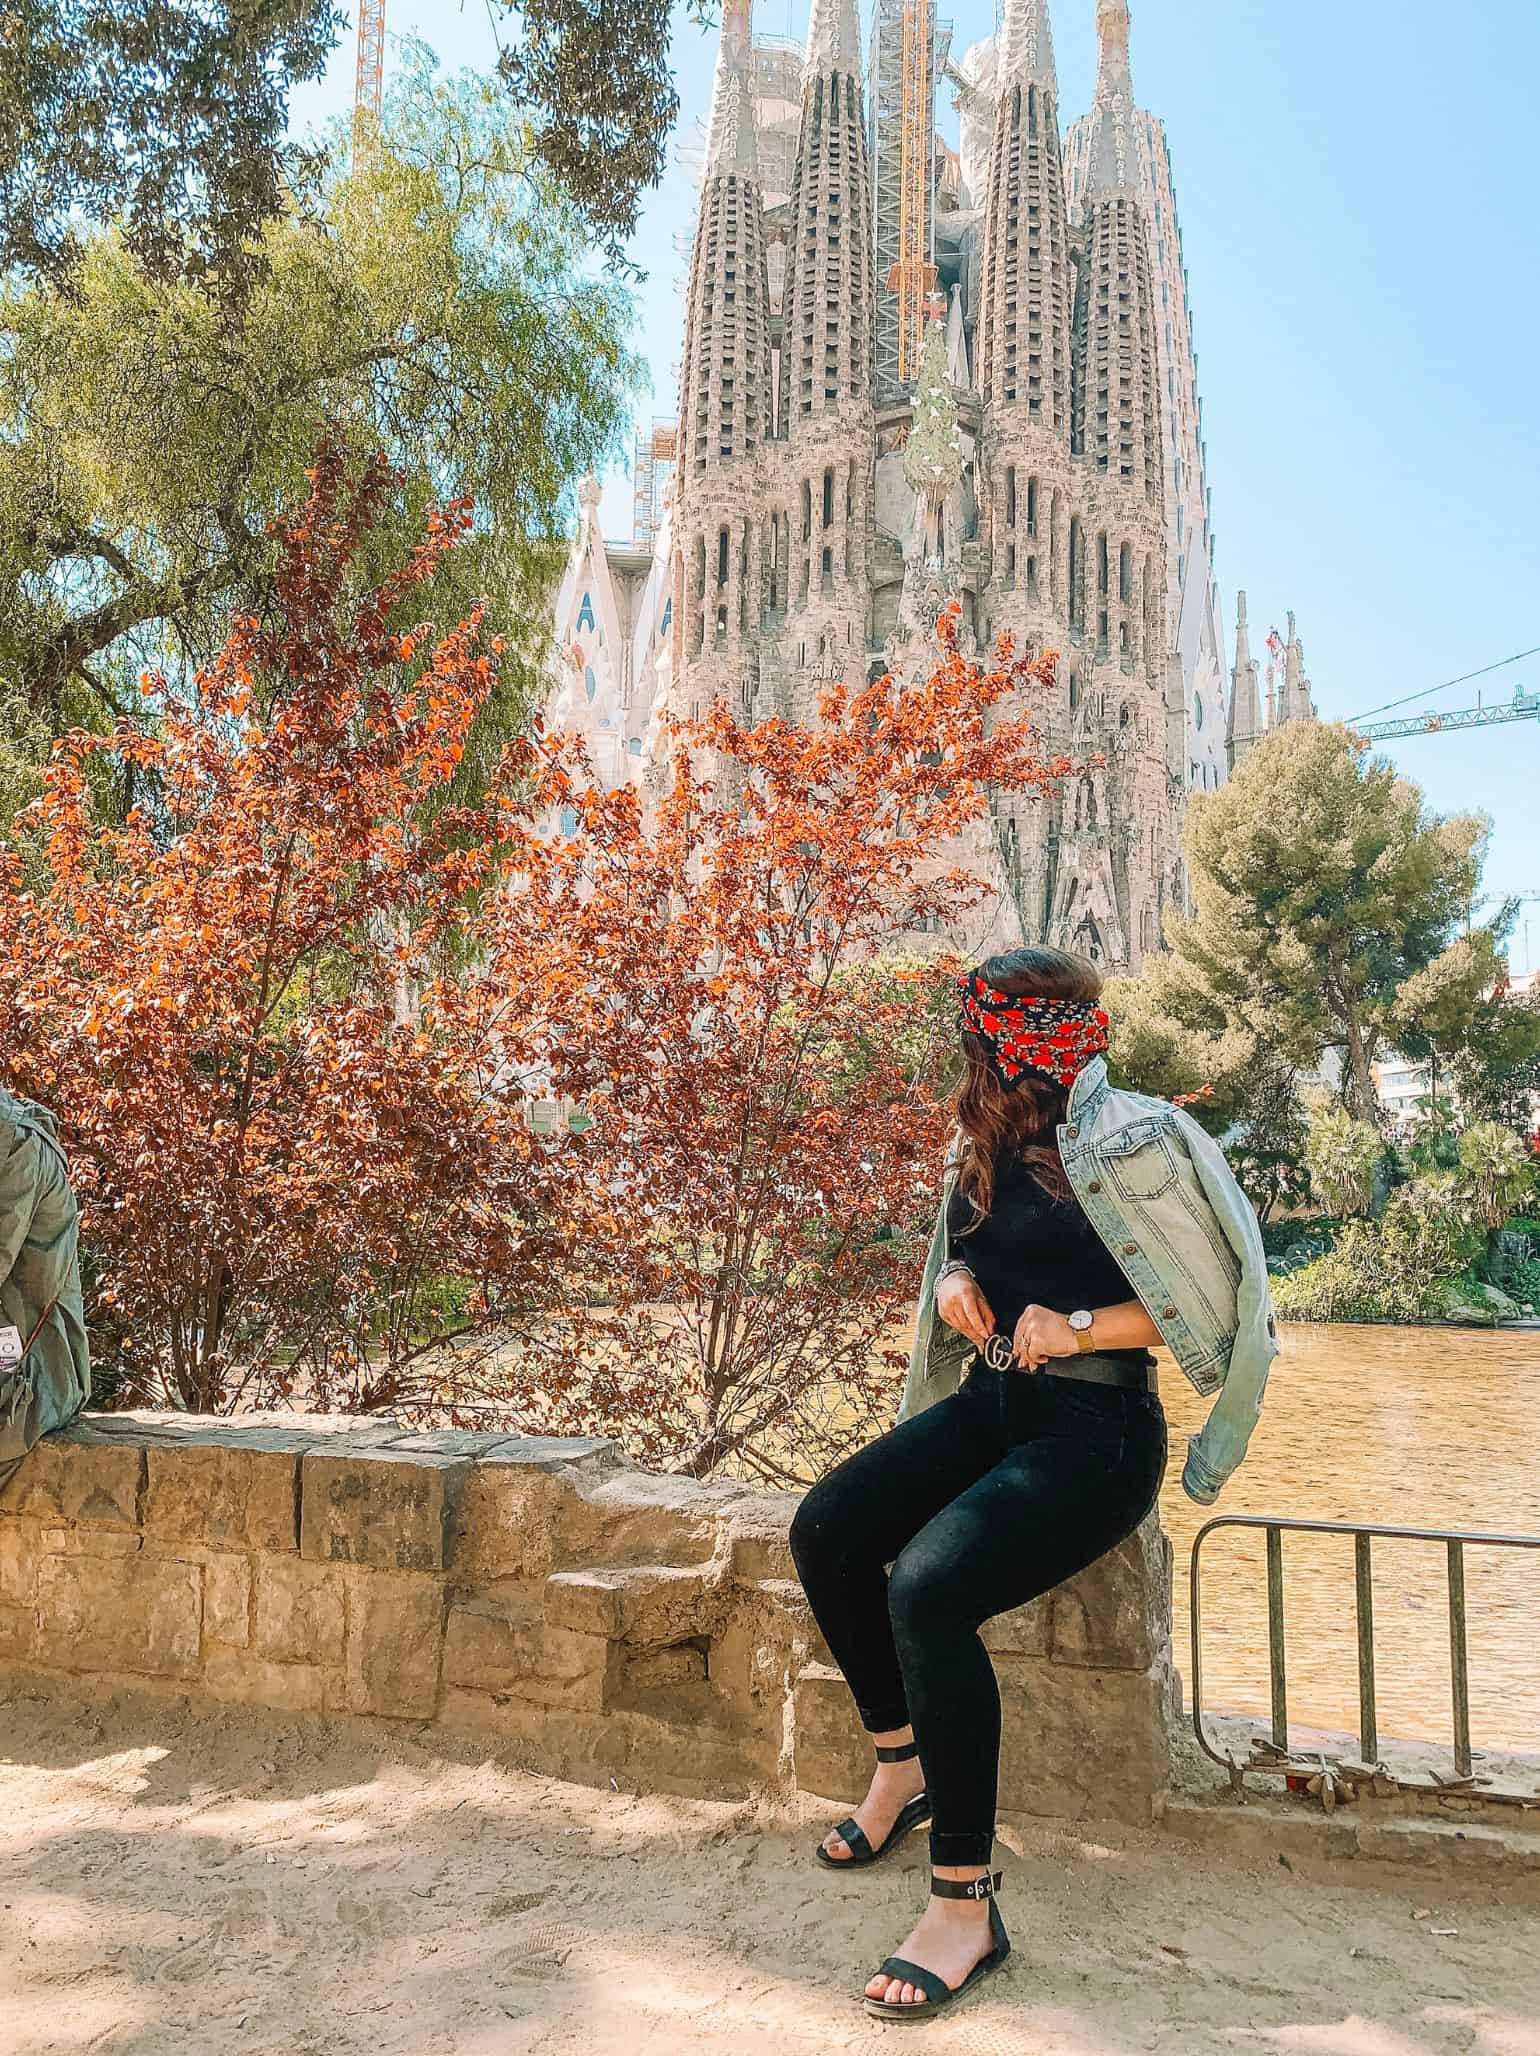 Me wearing my black jeggings in front of the Sagrada Familia in Barcelona. Black jeans are a must on the list of what to pack when studying abroad in Europe.